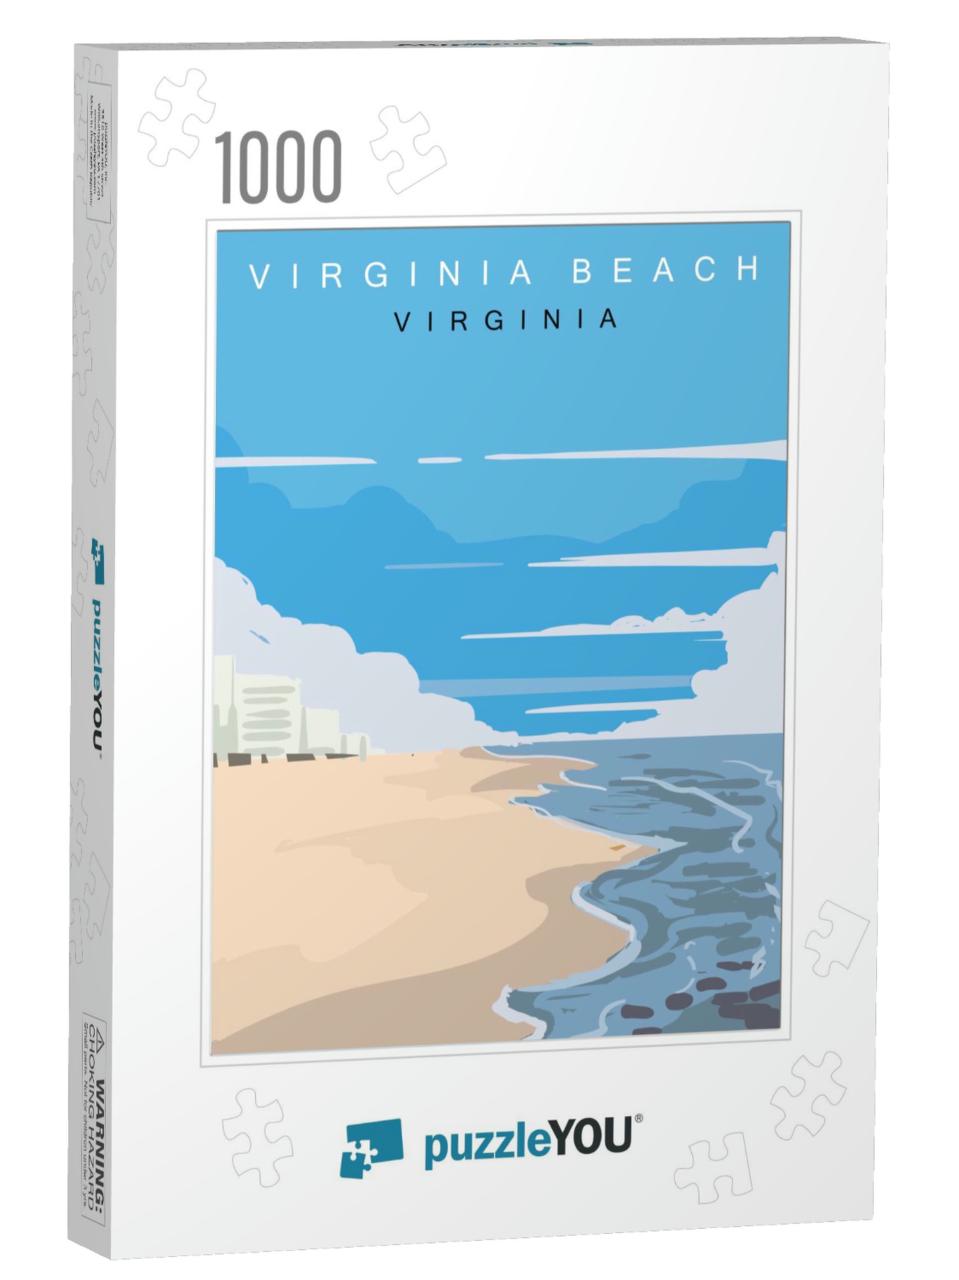 Virginia Beach Modern Vector Poster. Virginia Landscape I... Jigsaw Puzzle with 1000 pieces